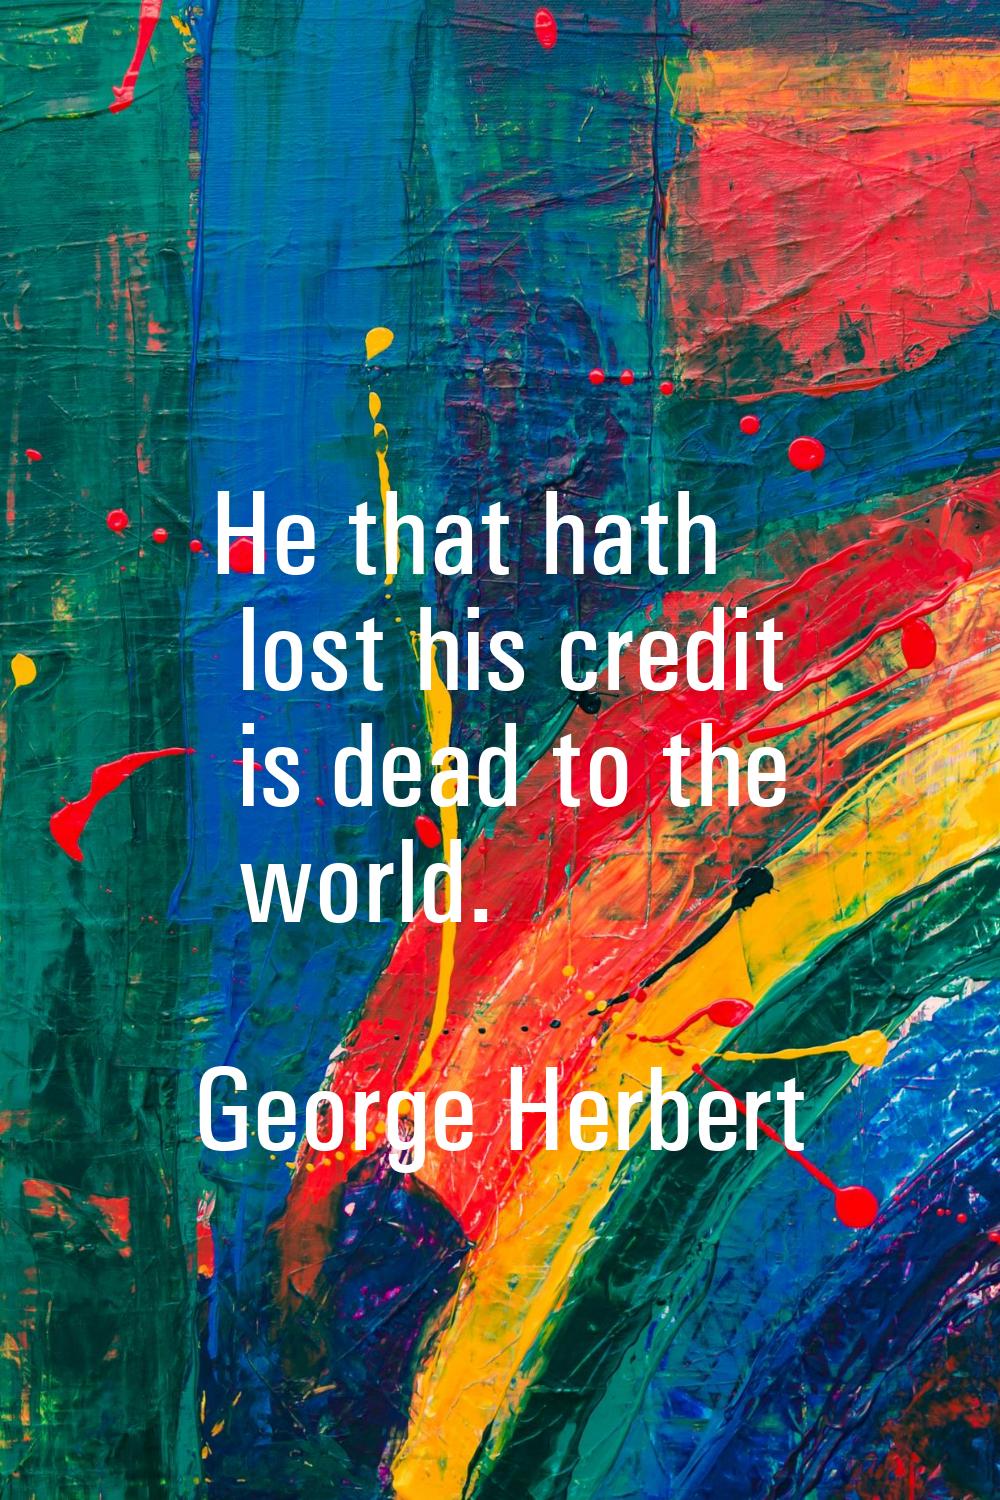 He that hath lost his credit is dead to the world.